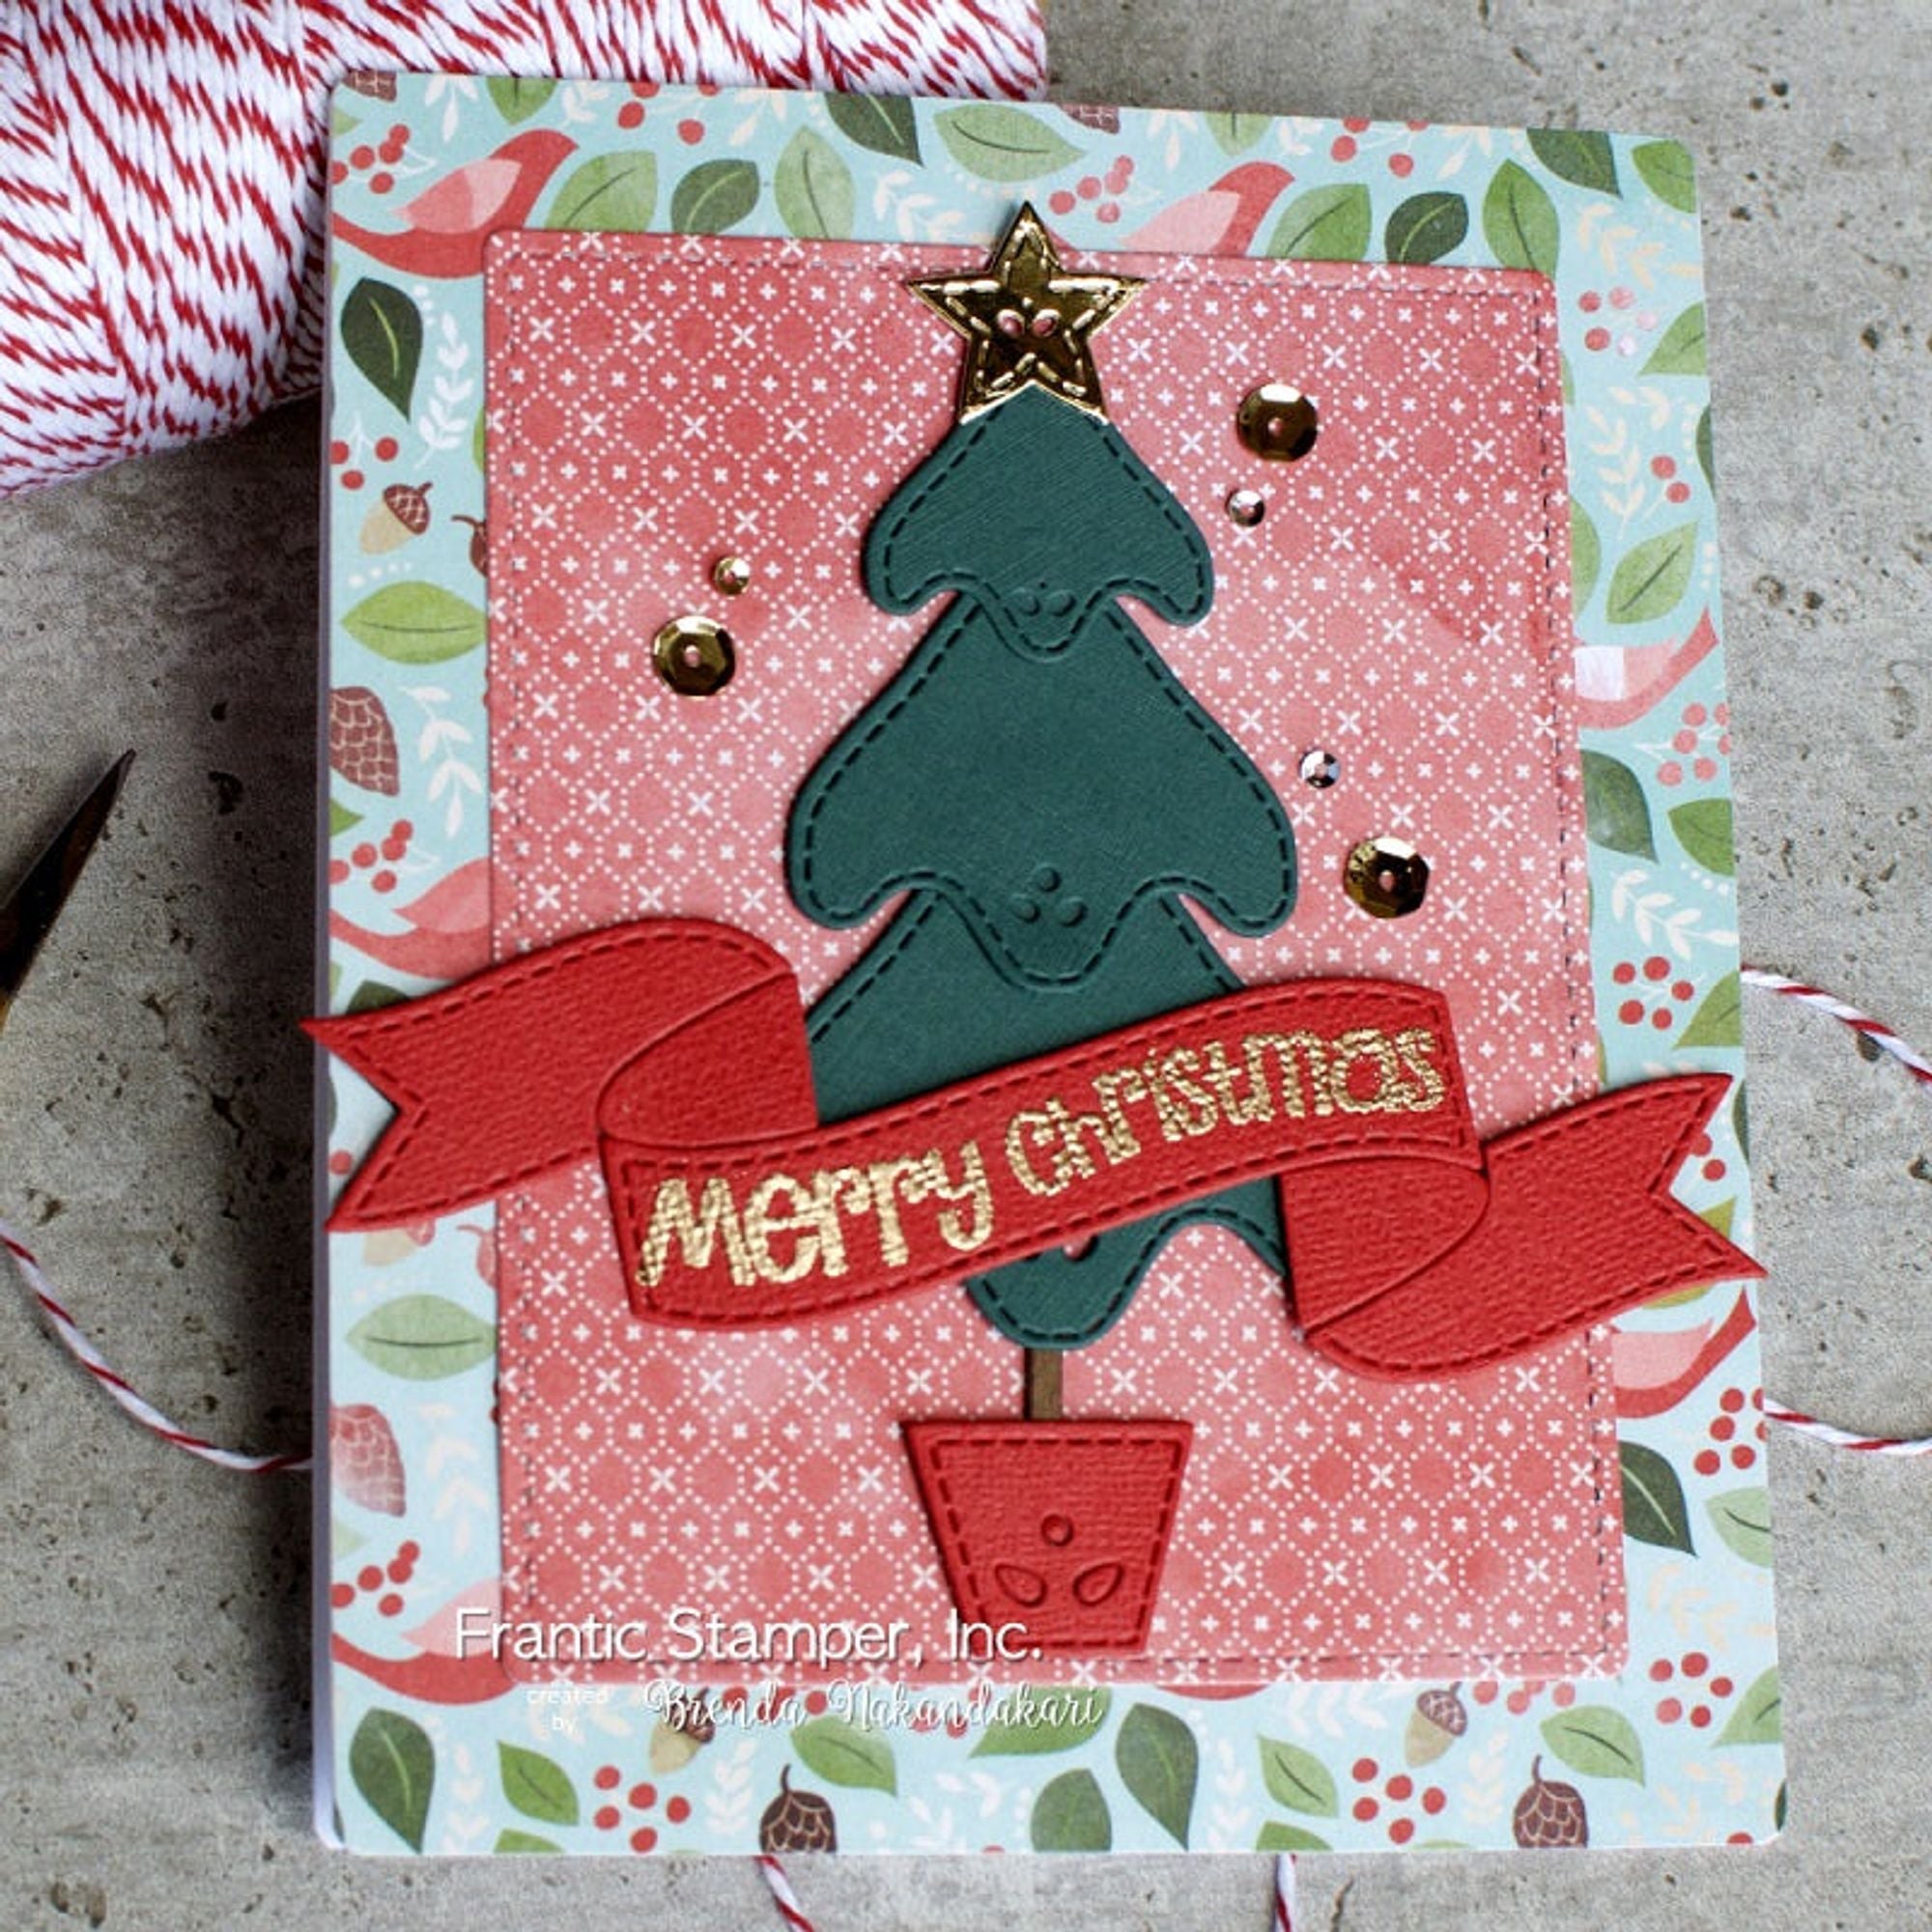 Frantic Stamper Precision Die - Country Christmas Tree